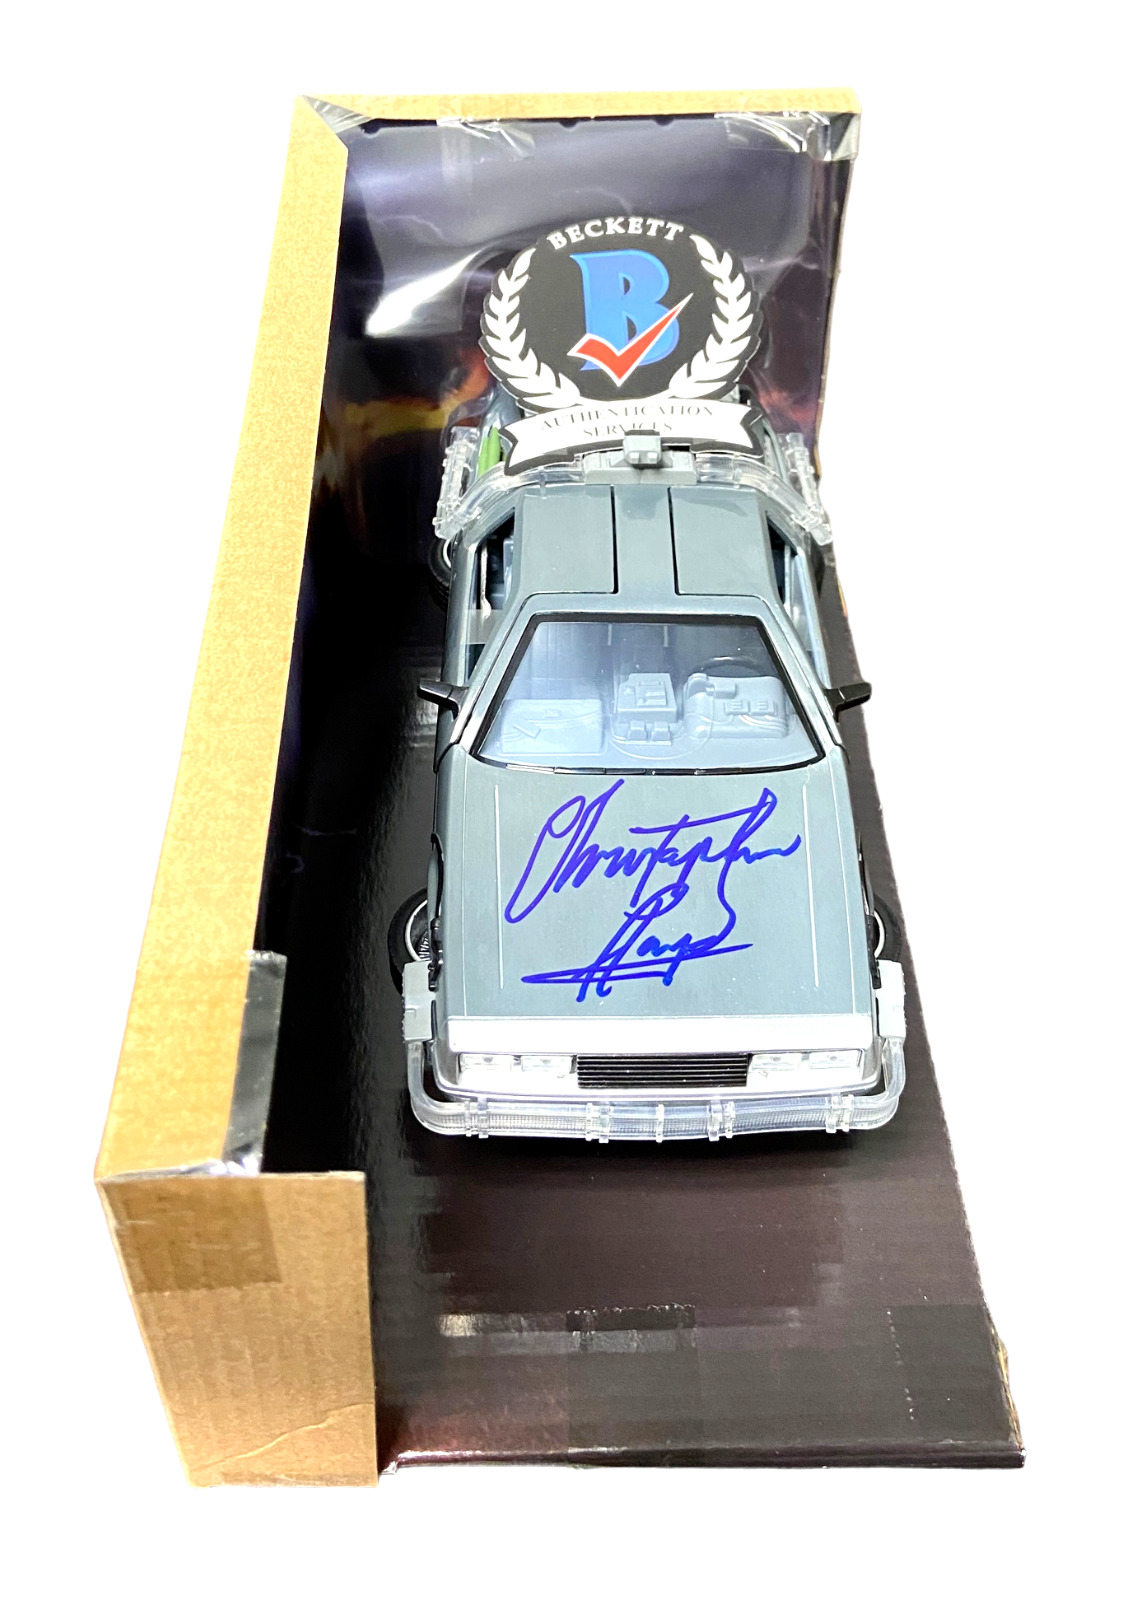 CHRISTOPHER LLOYD SIGNED AUTO BACK TO THE FUTURE 1:24 DELOREAN DIECAST BECKETT